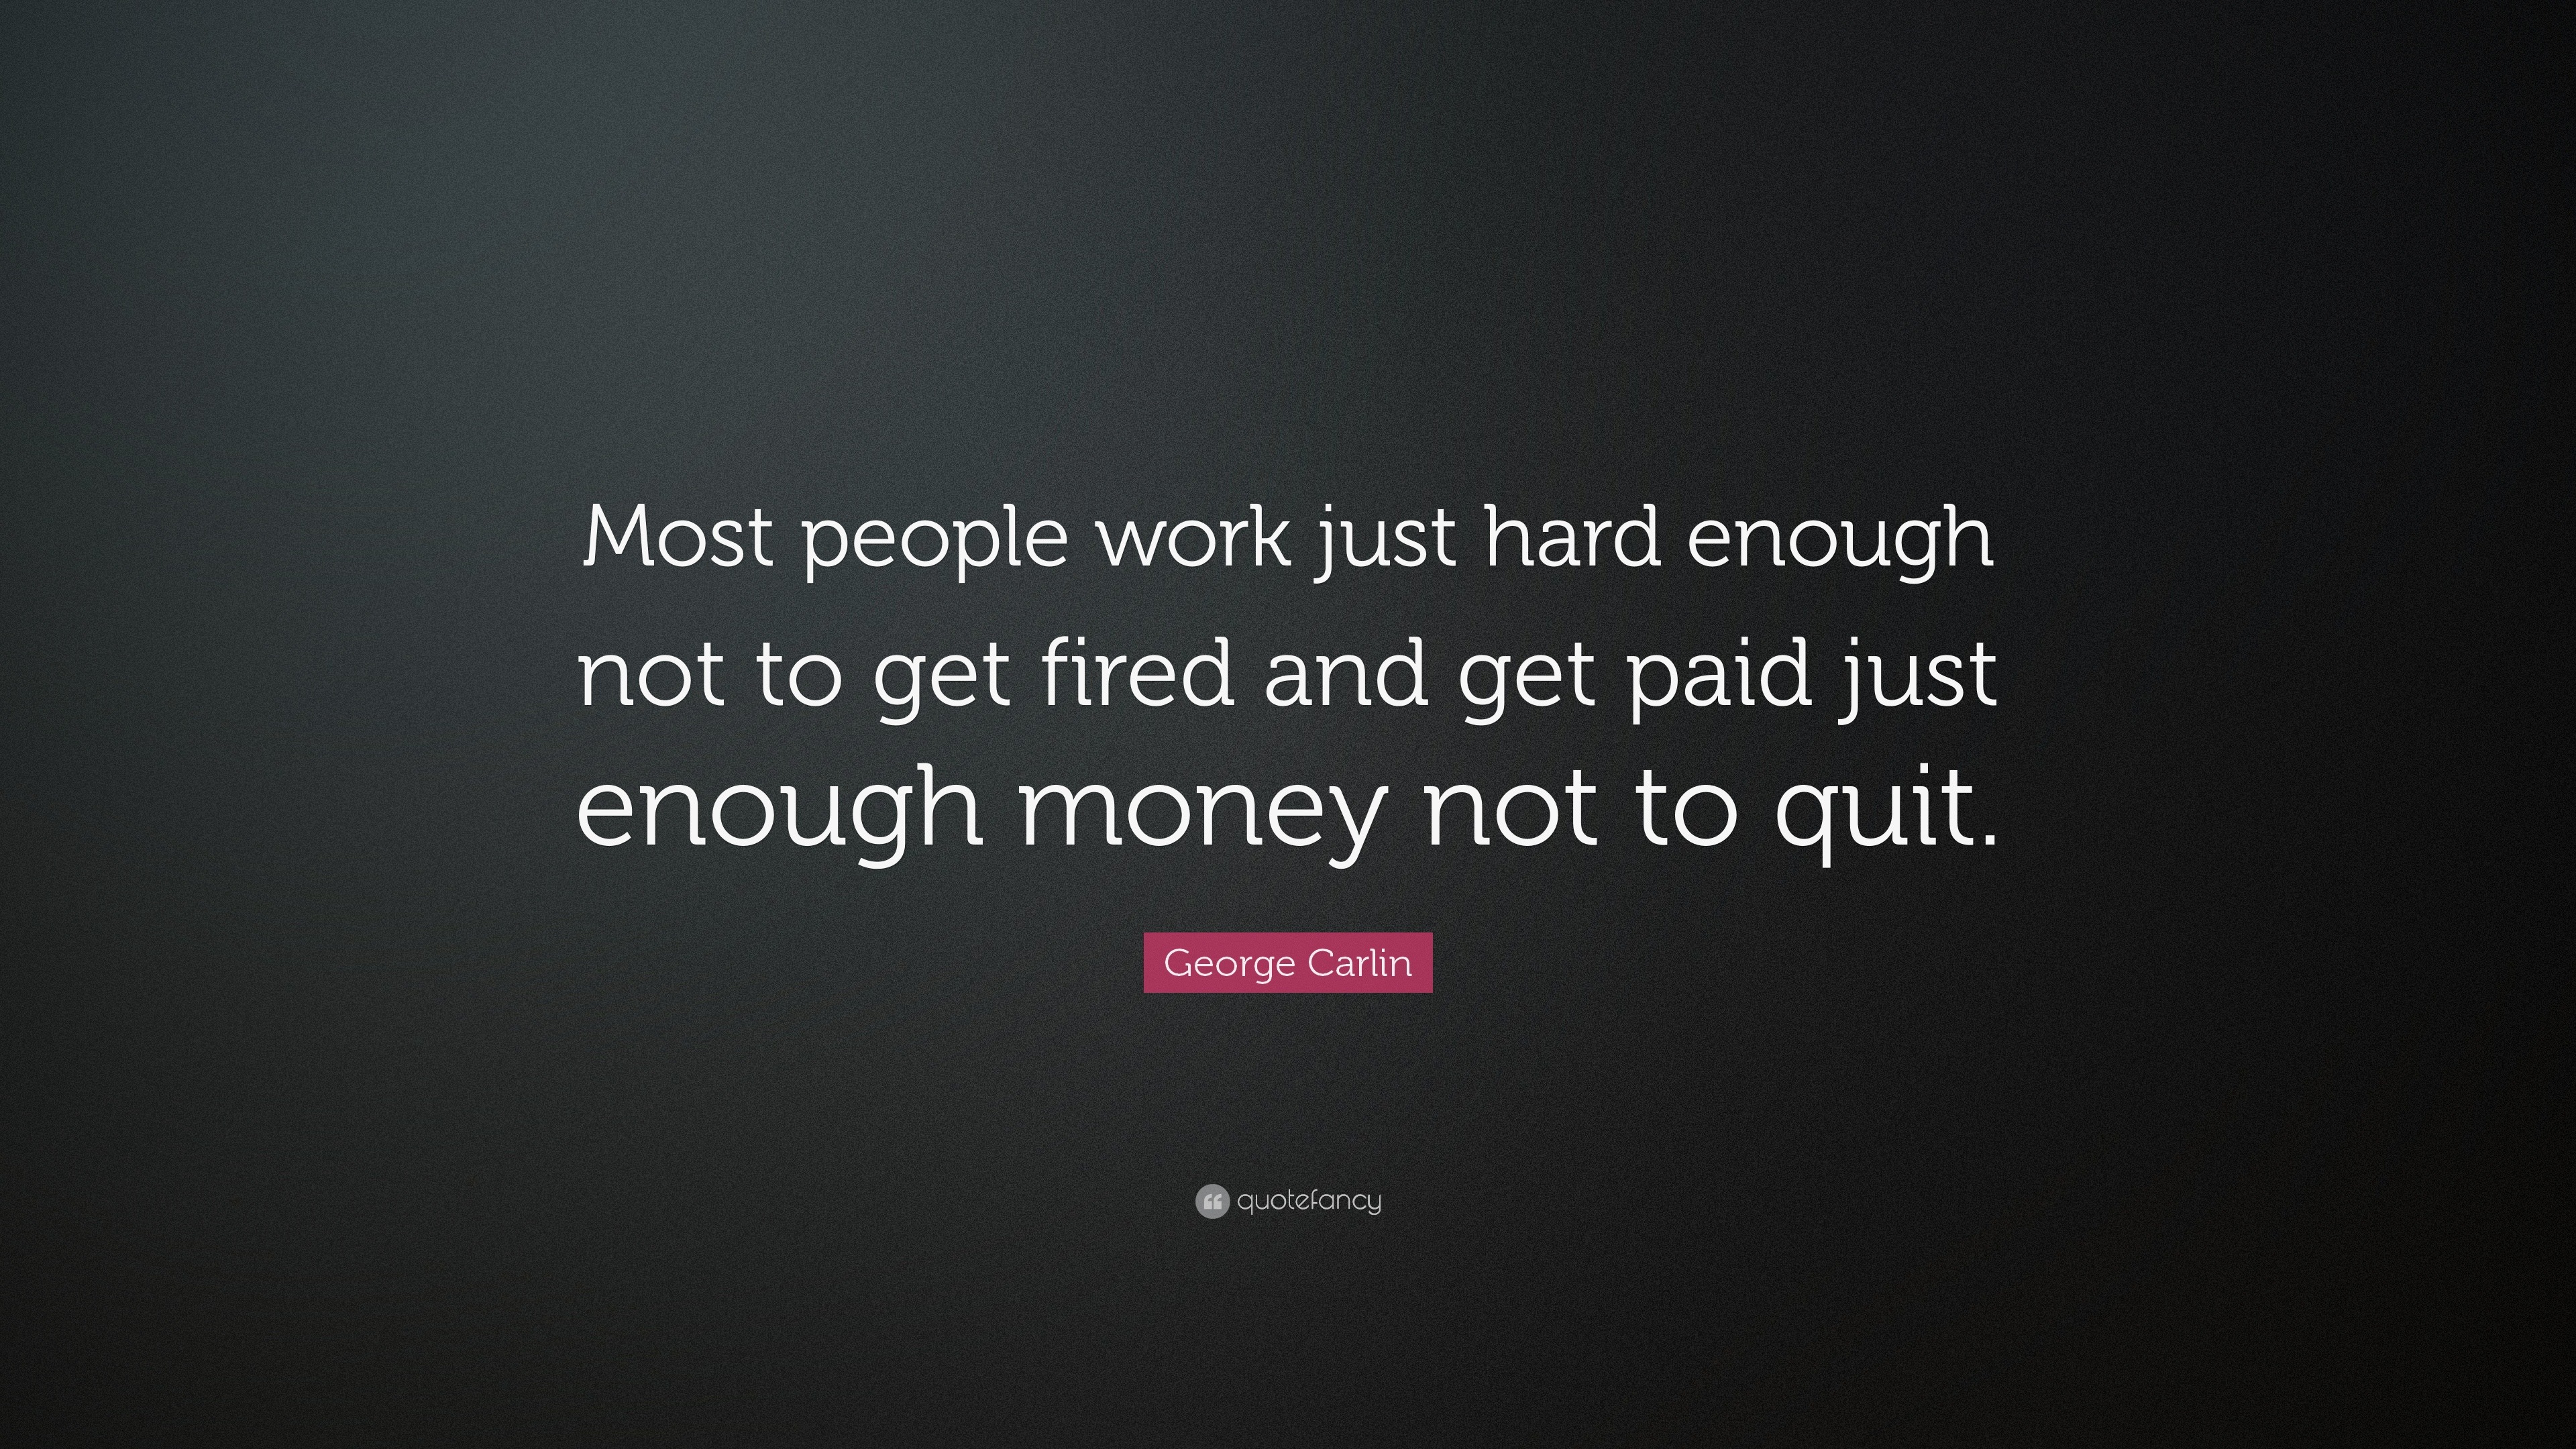 George Carlin Quote: “Most people work just hard enough not to get